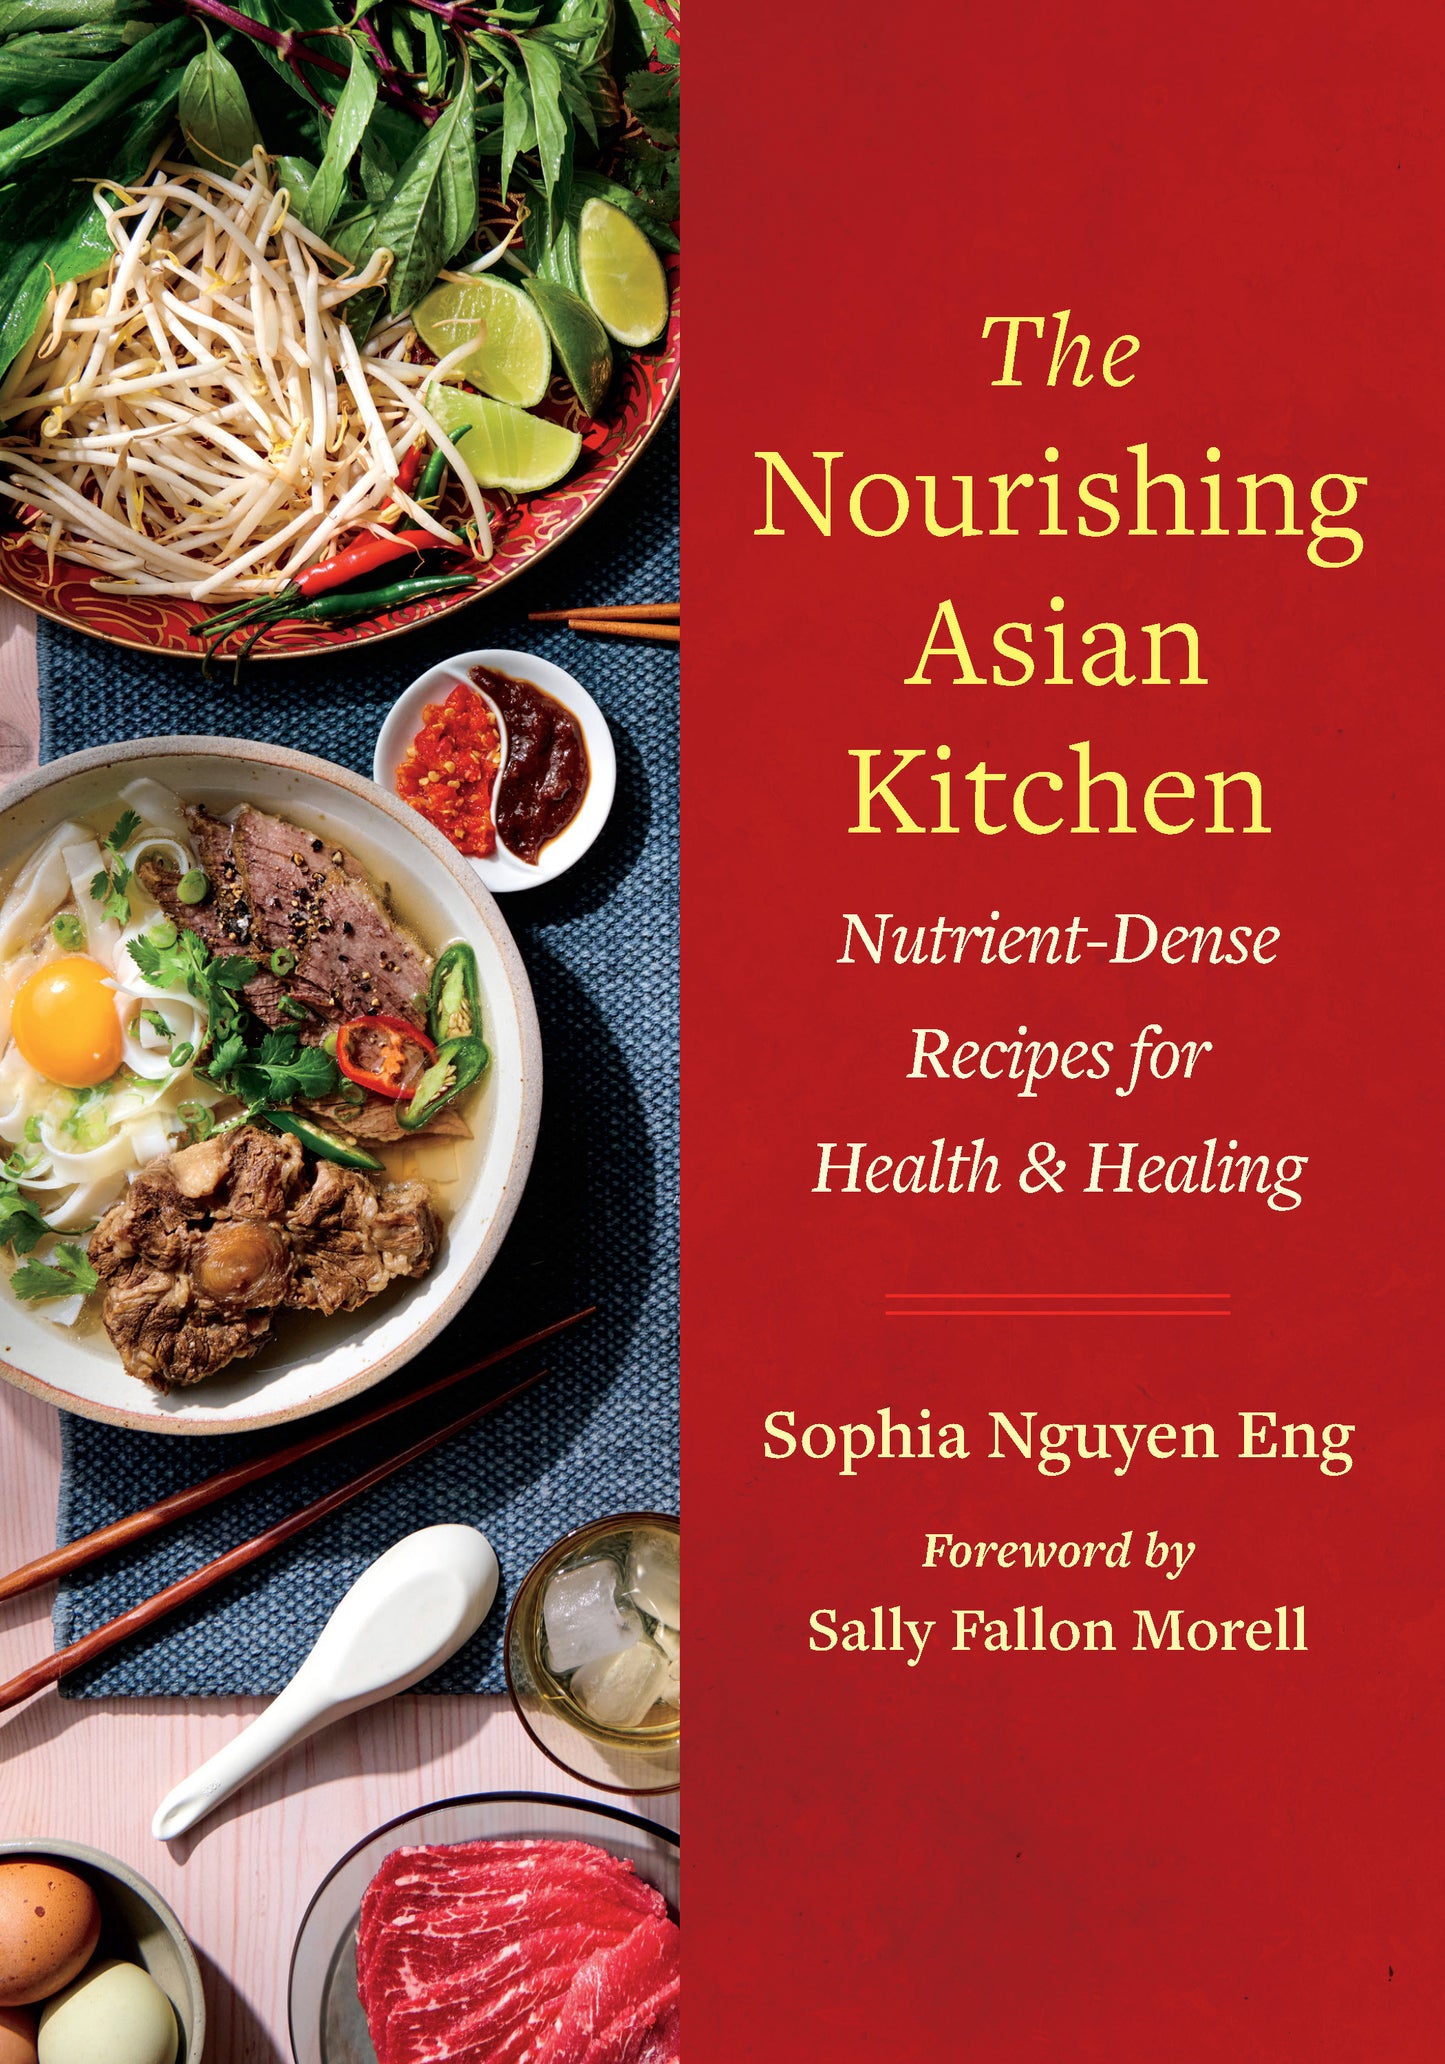 The Nourishing Asian Kitchen Cookbook - Signed Copy!